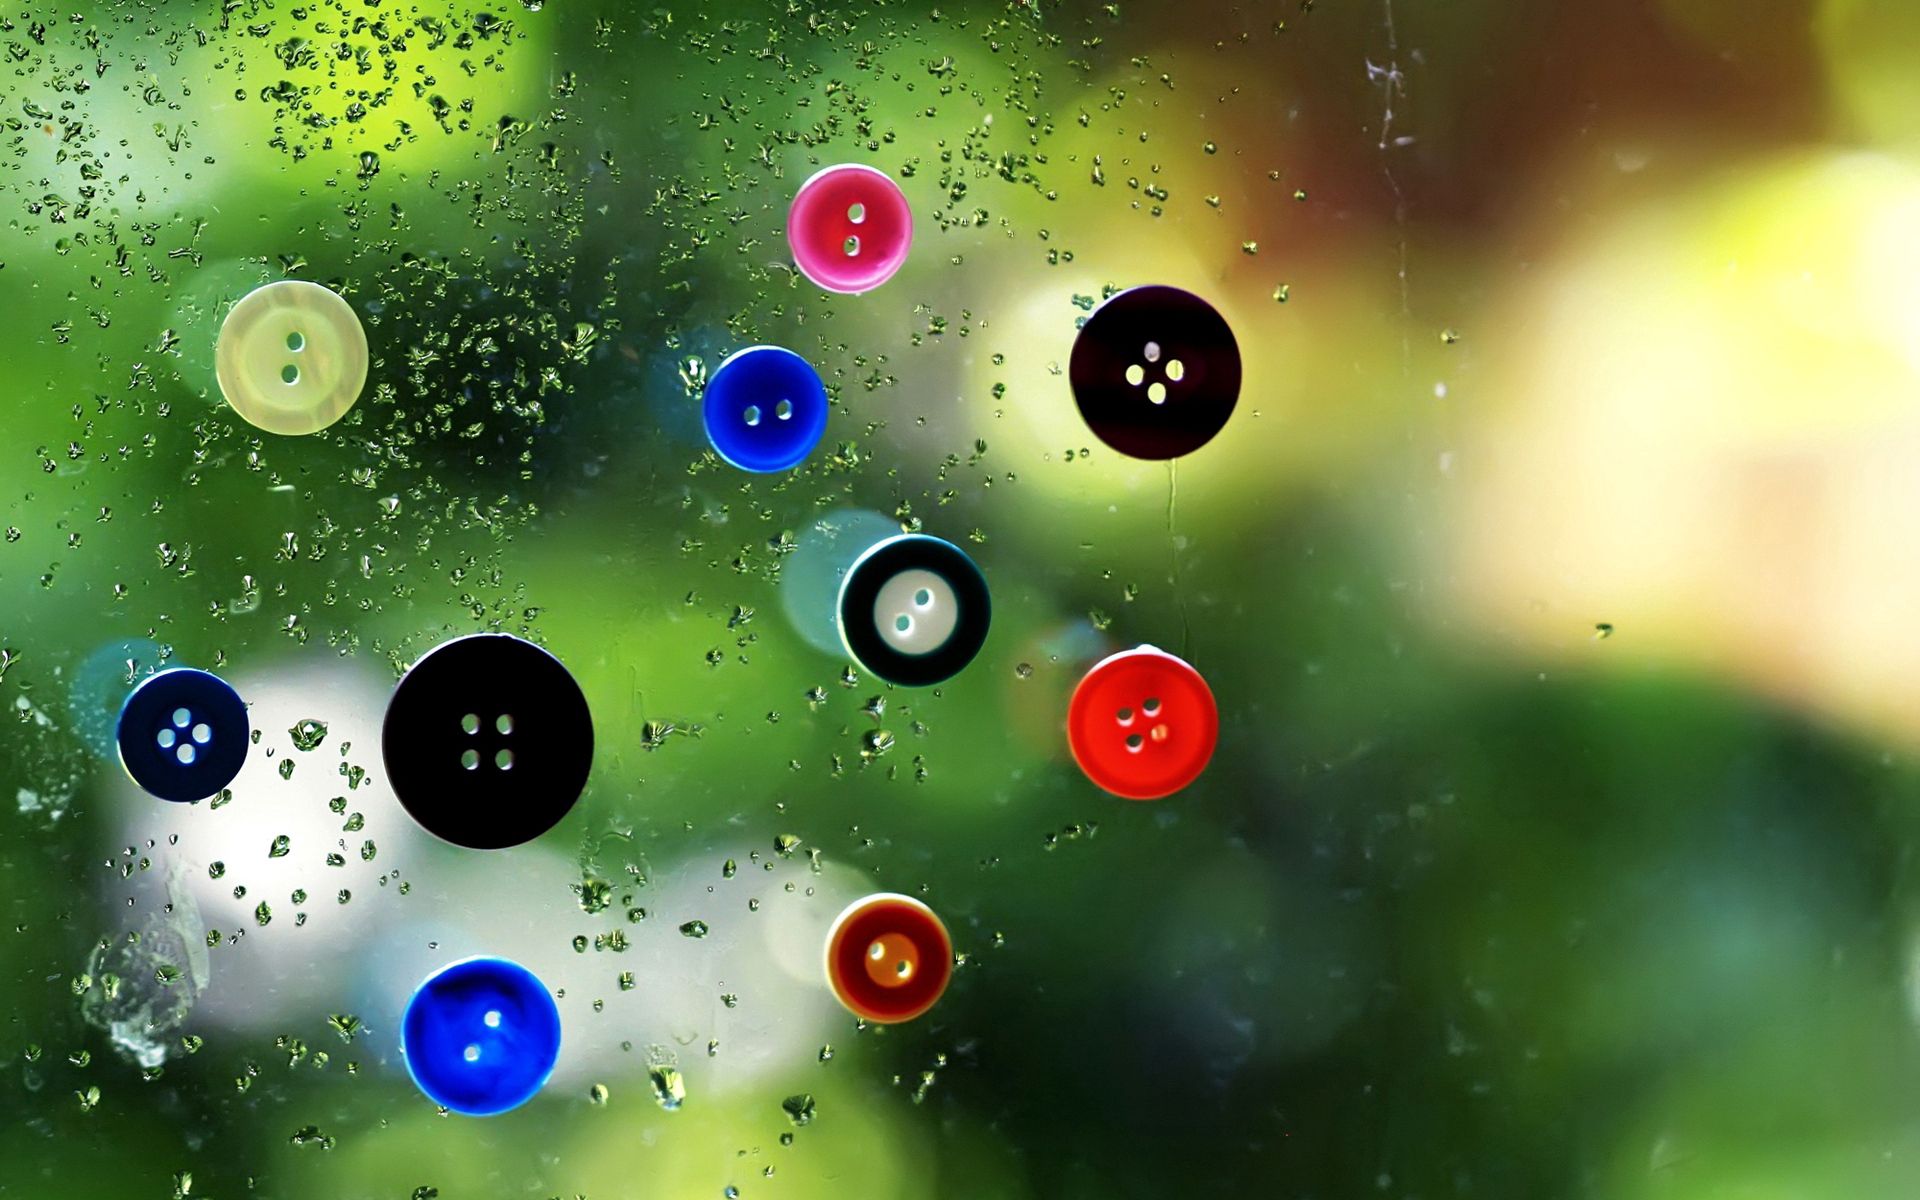 surface, miscellanea, miscellaneous, multicolored, motley, wet, buttons, humid iphone wallpaper